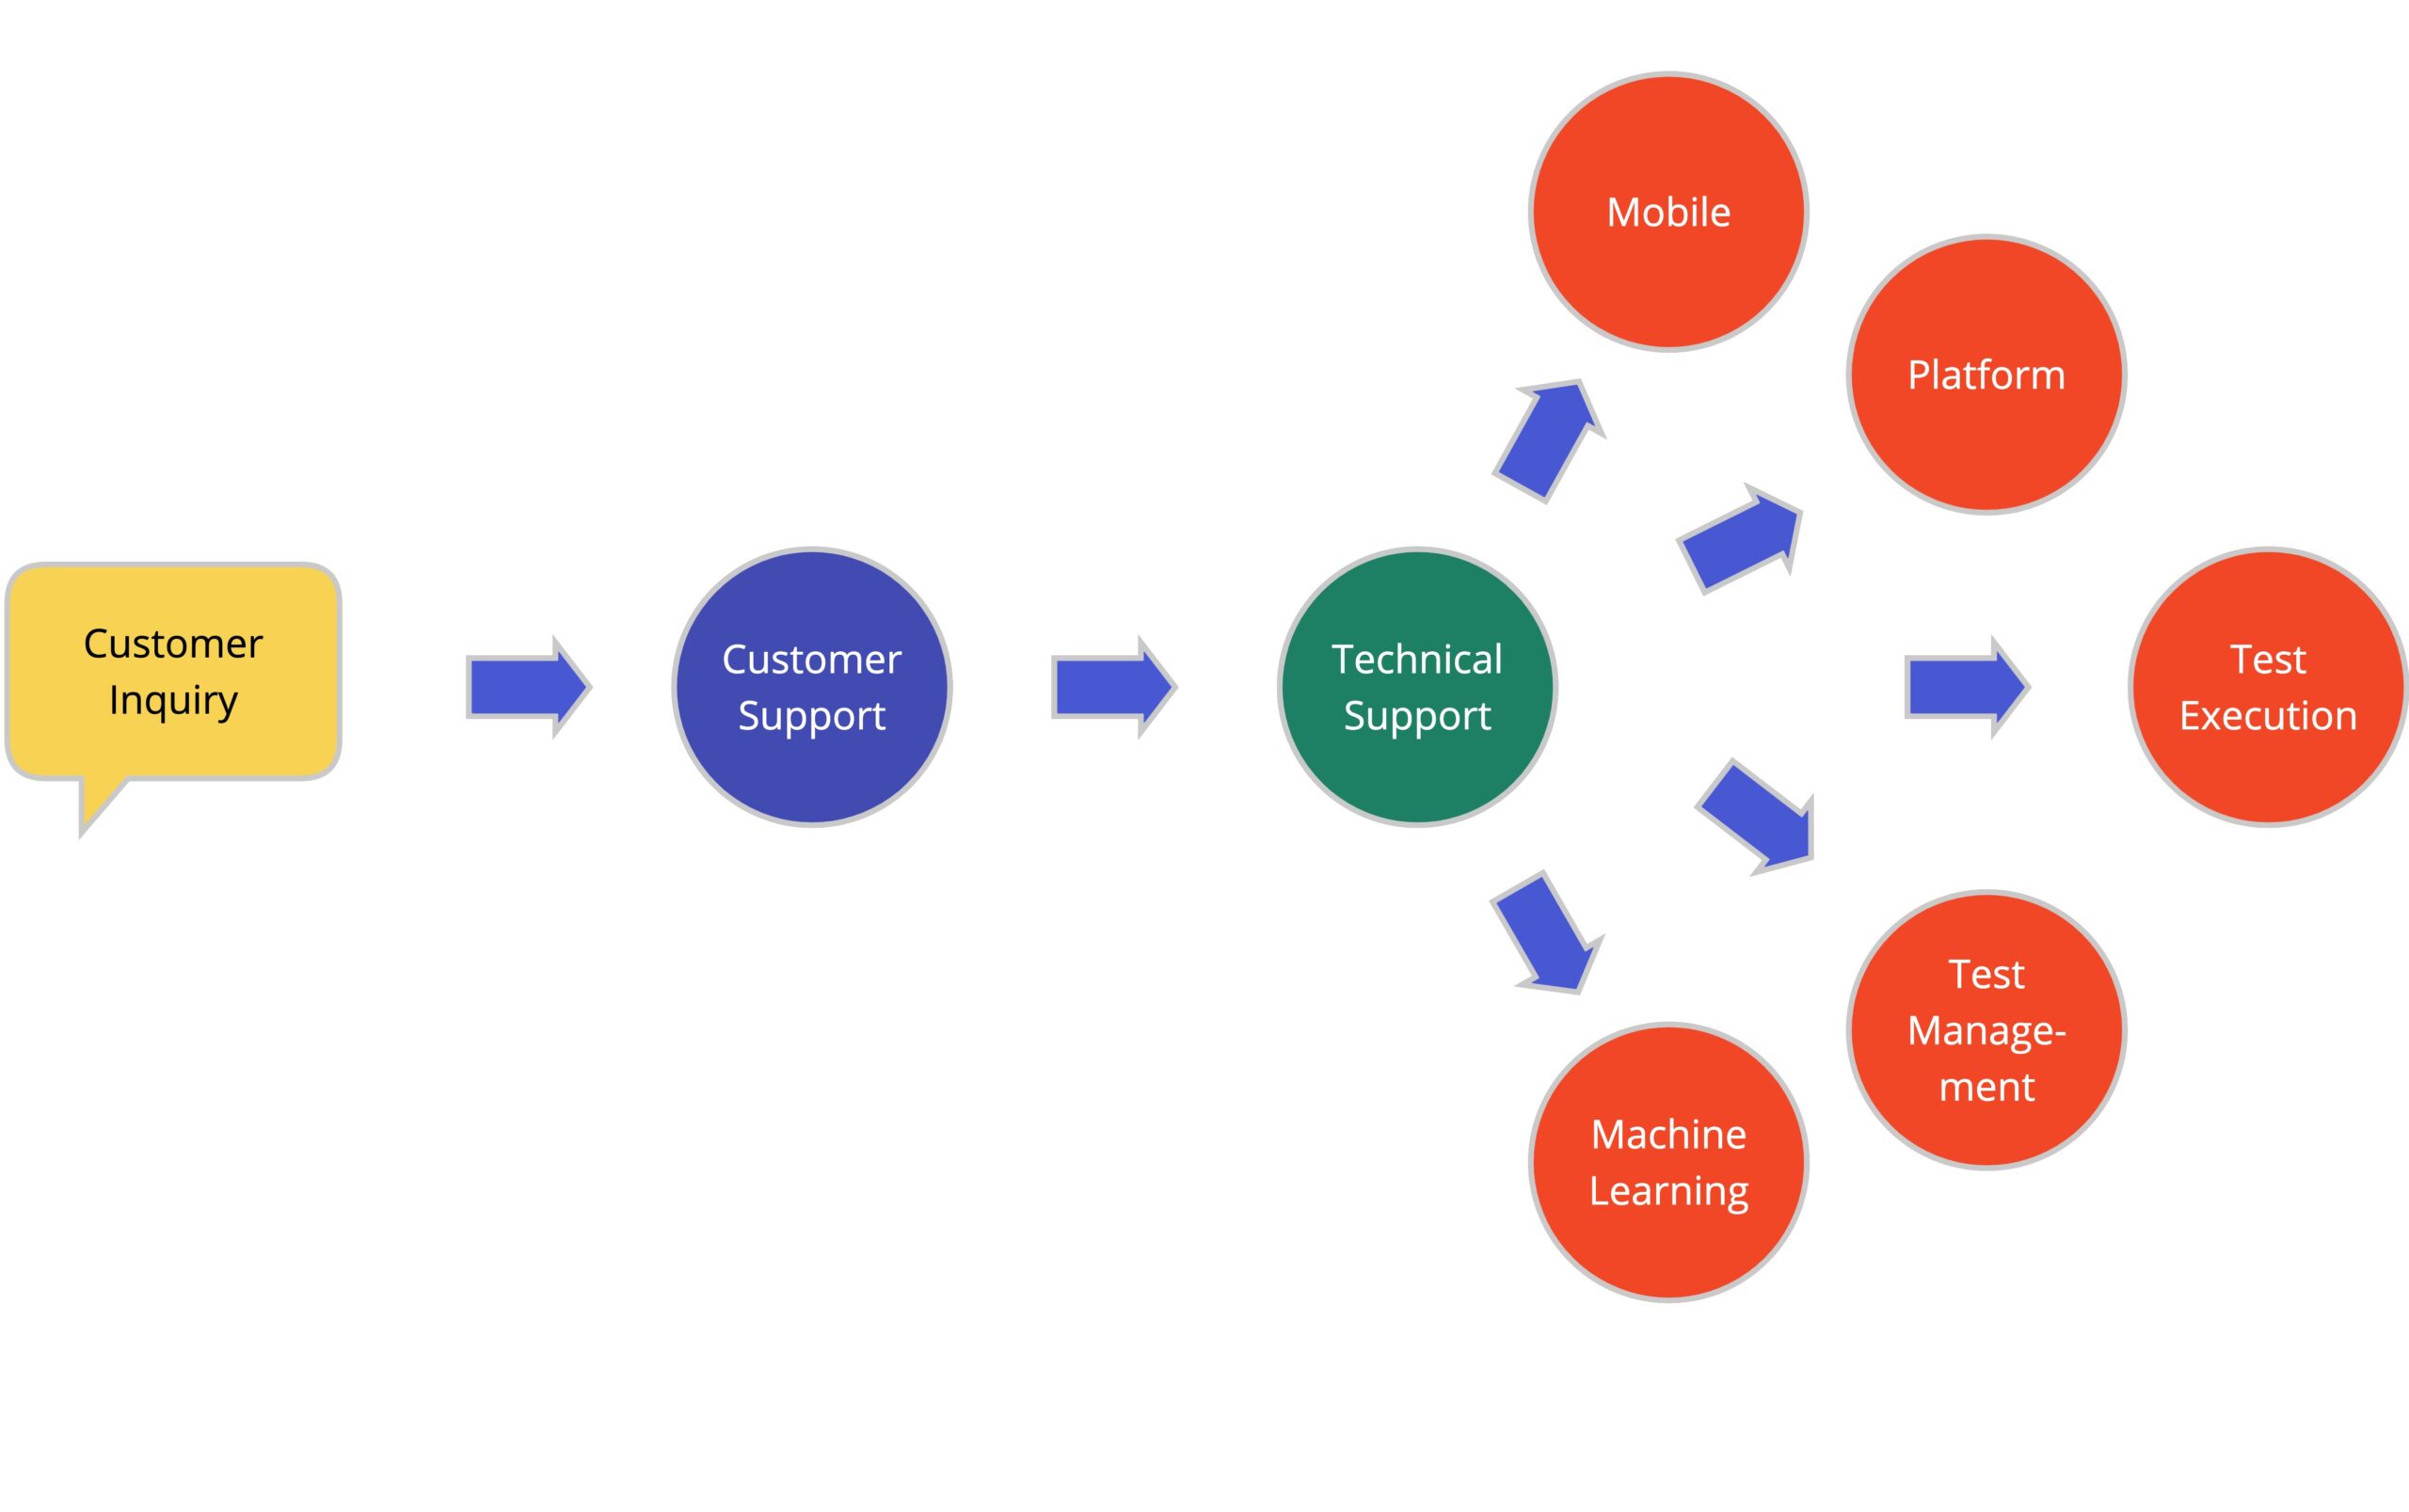 Support chain diagram showing Technical Support as the center